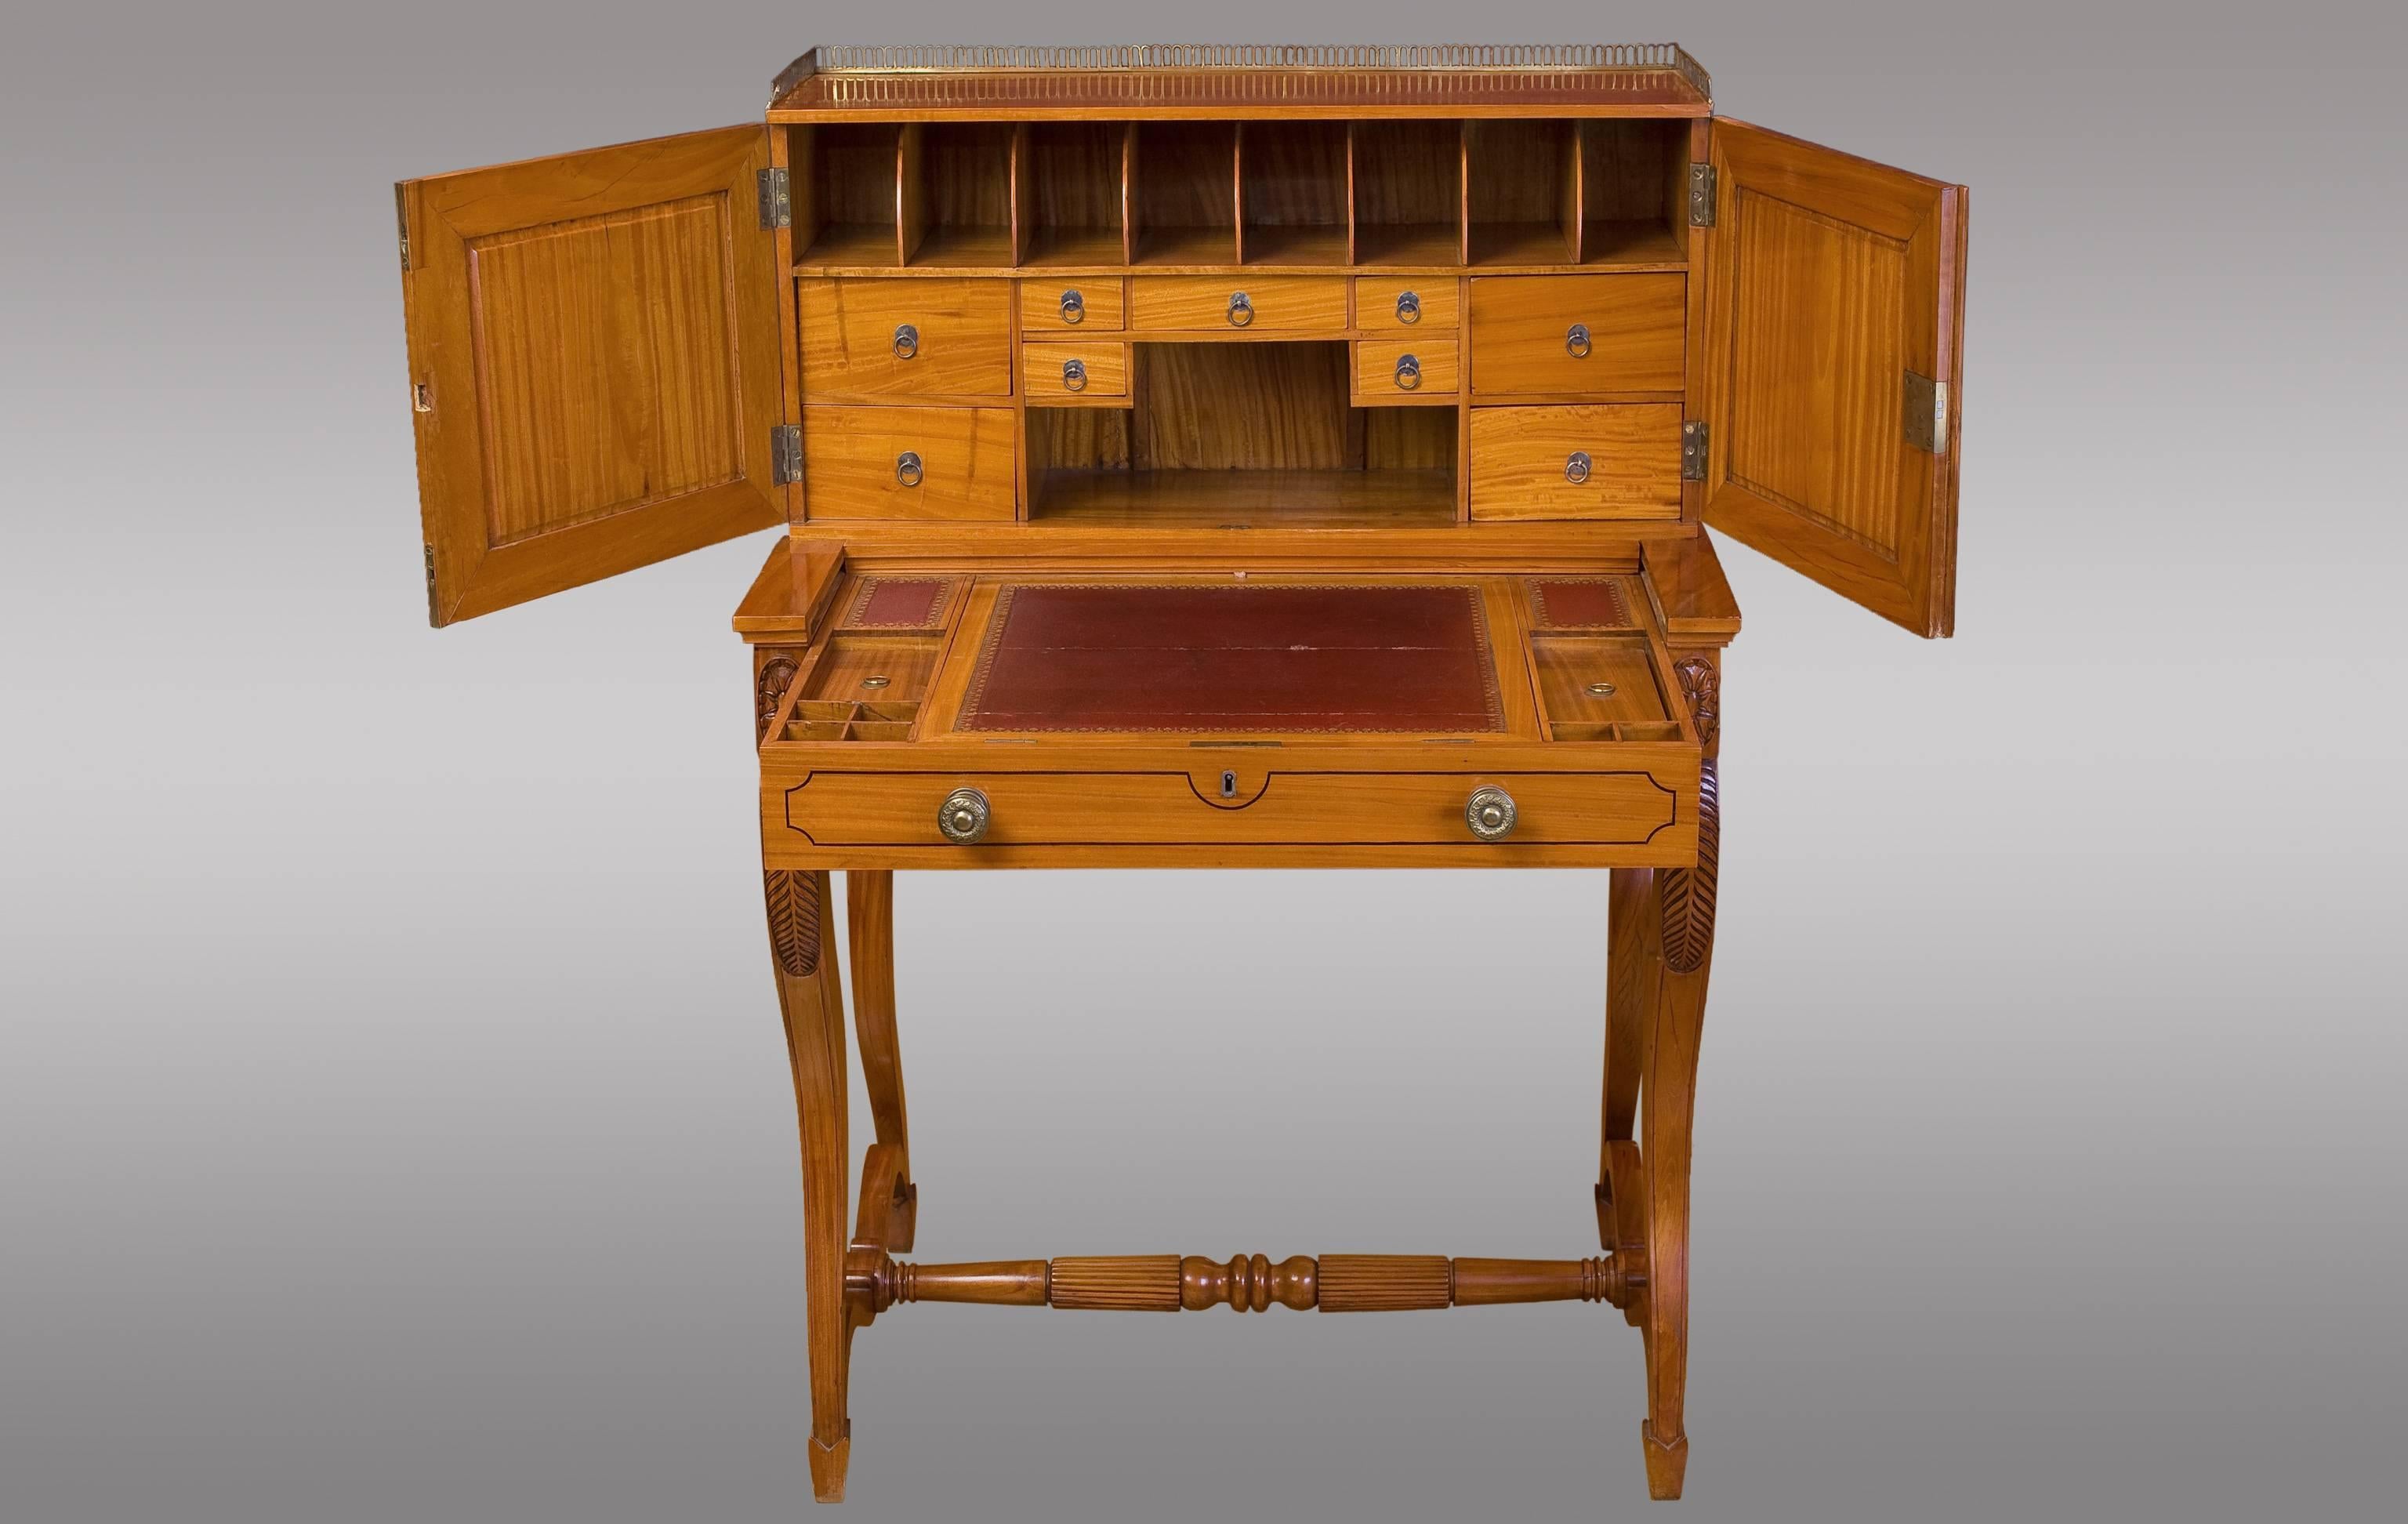 An Angloindian Bonheur du Jour, circa 1840
In solid satinwood, with lectern and compartiment in the desk.

